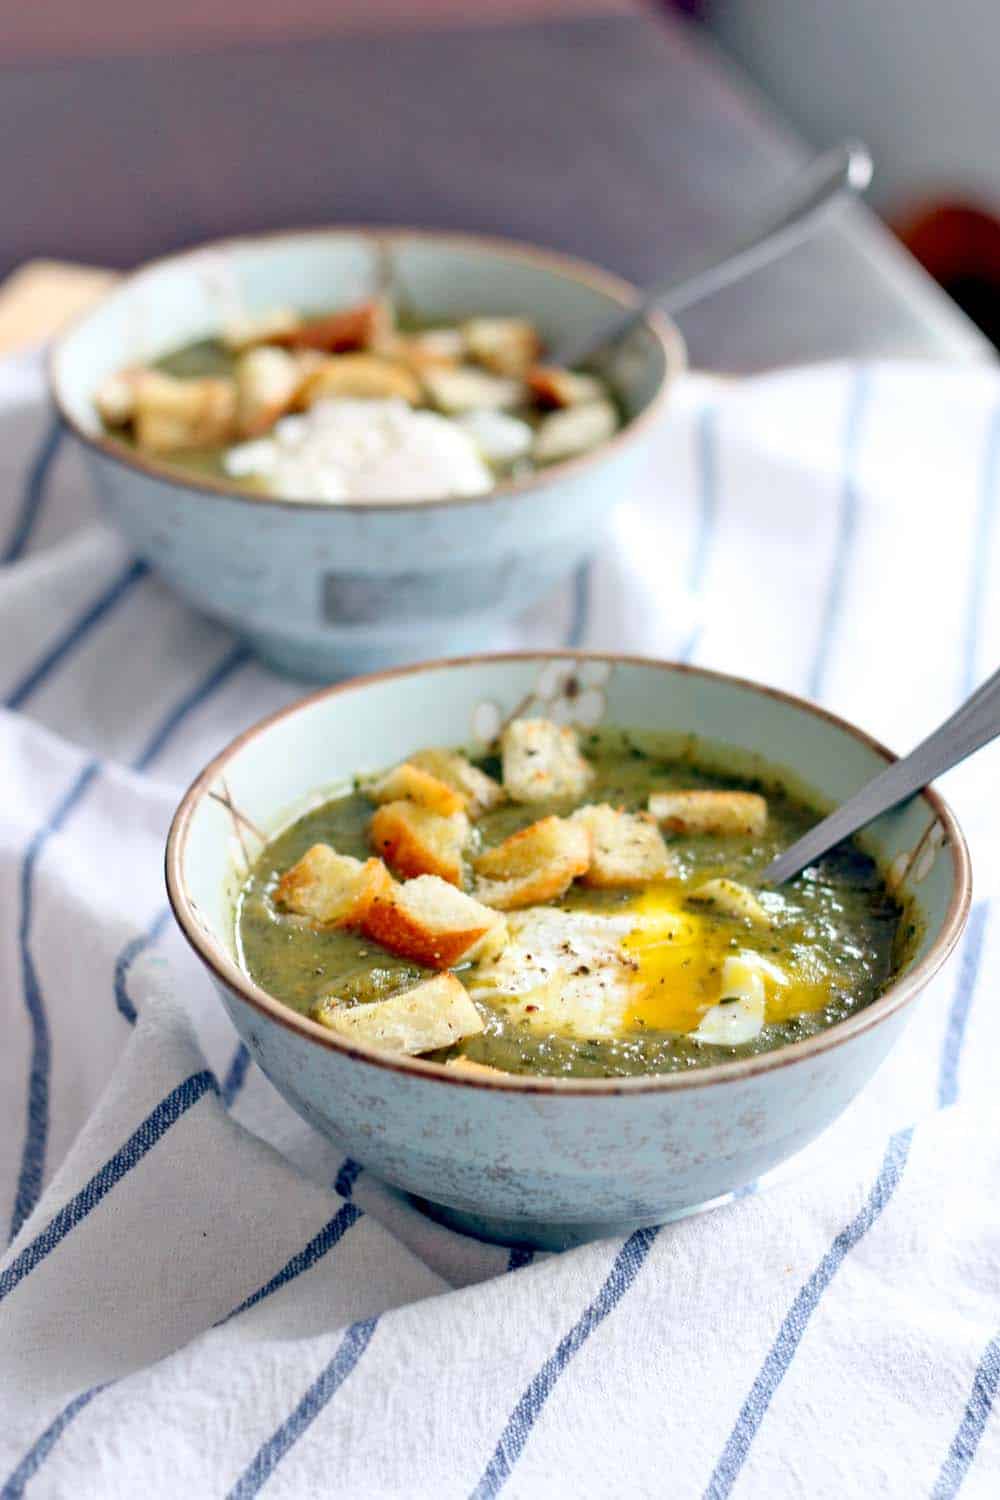 Two bowls of green soup topped with croutons and an egg; one in the foreground and one slightly blurred in the background.